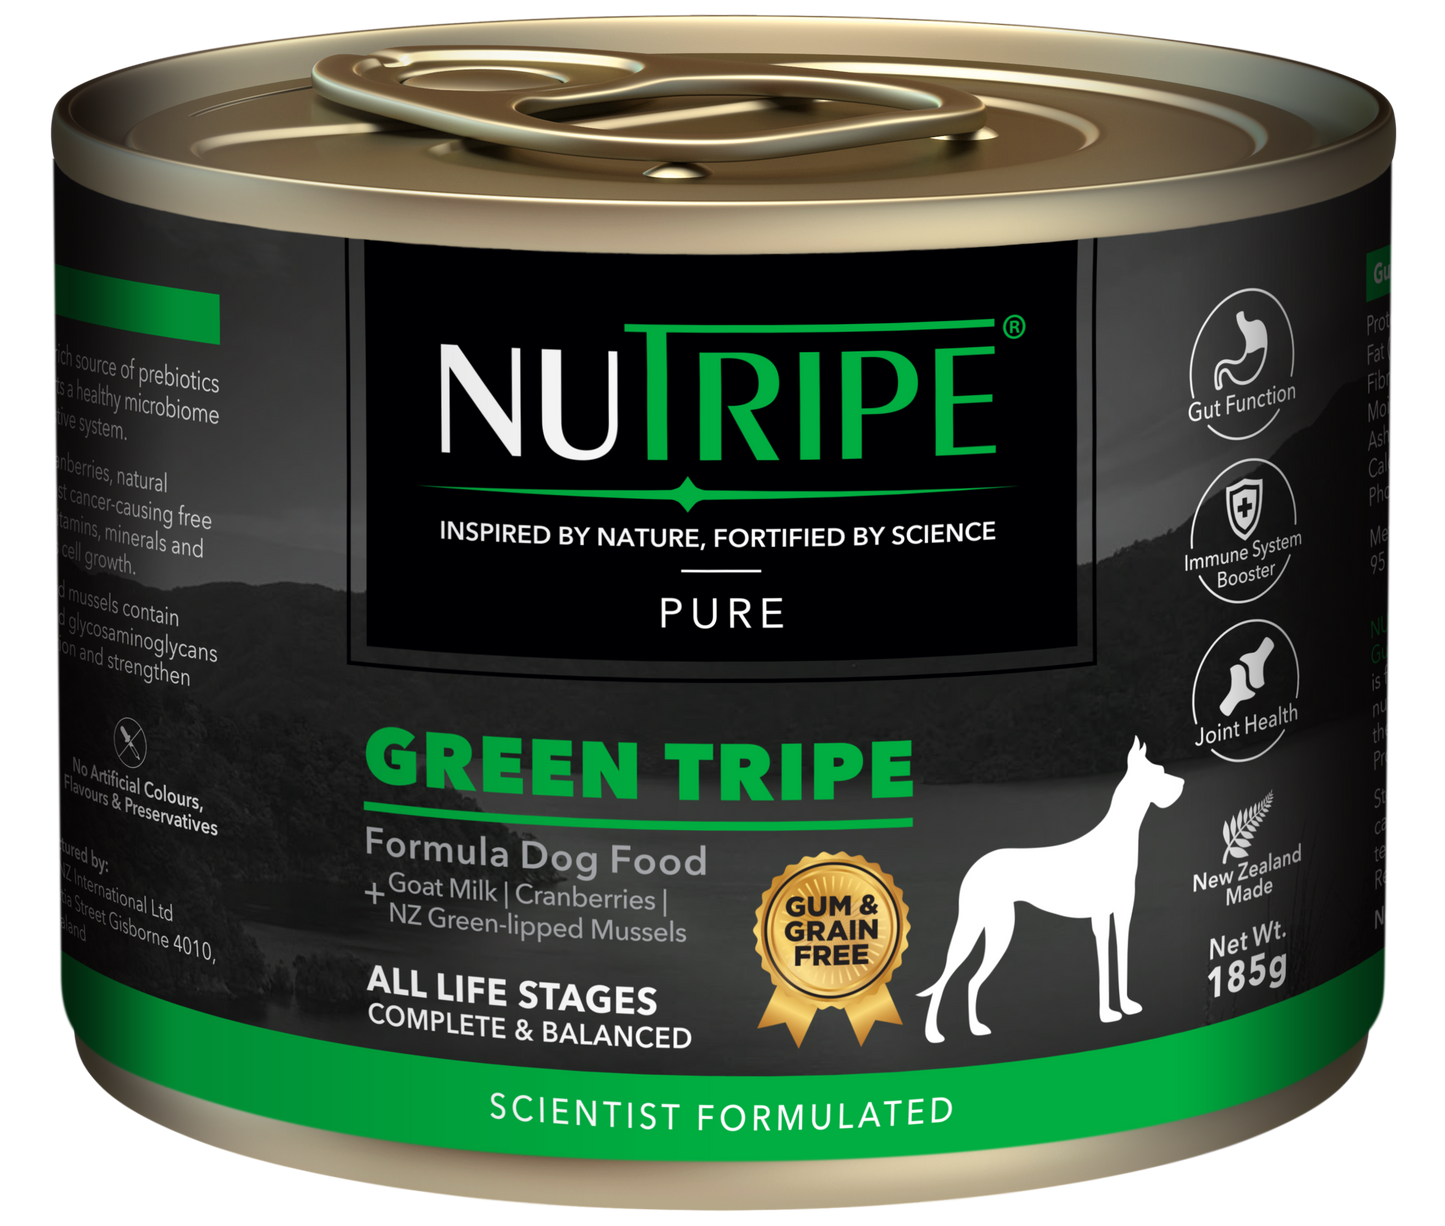 Your Whole Dog's NUTRIPE PURE Green Tripe Formula Dog Food (185g cans).